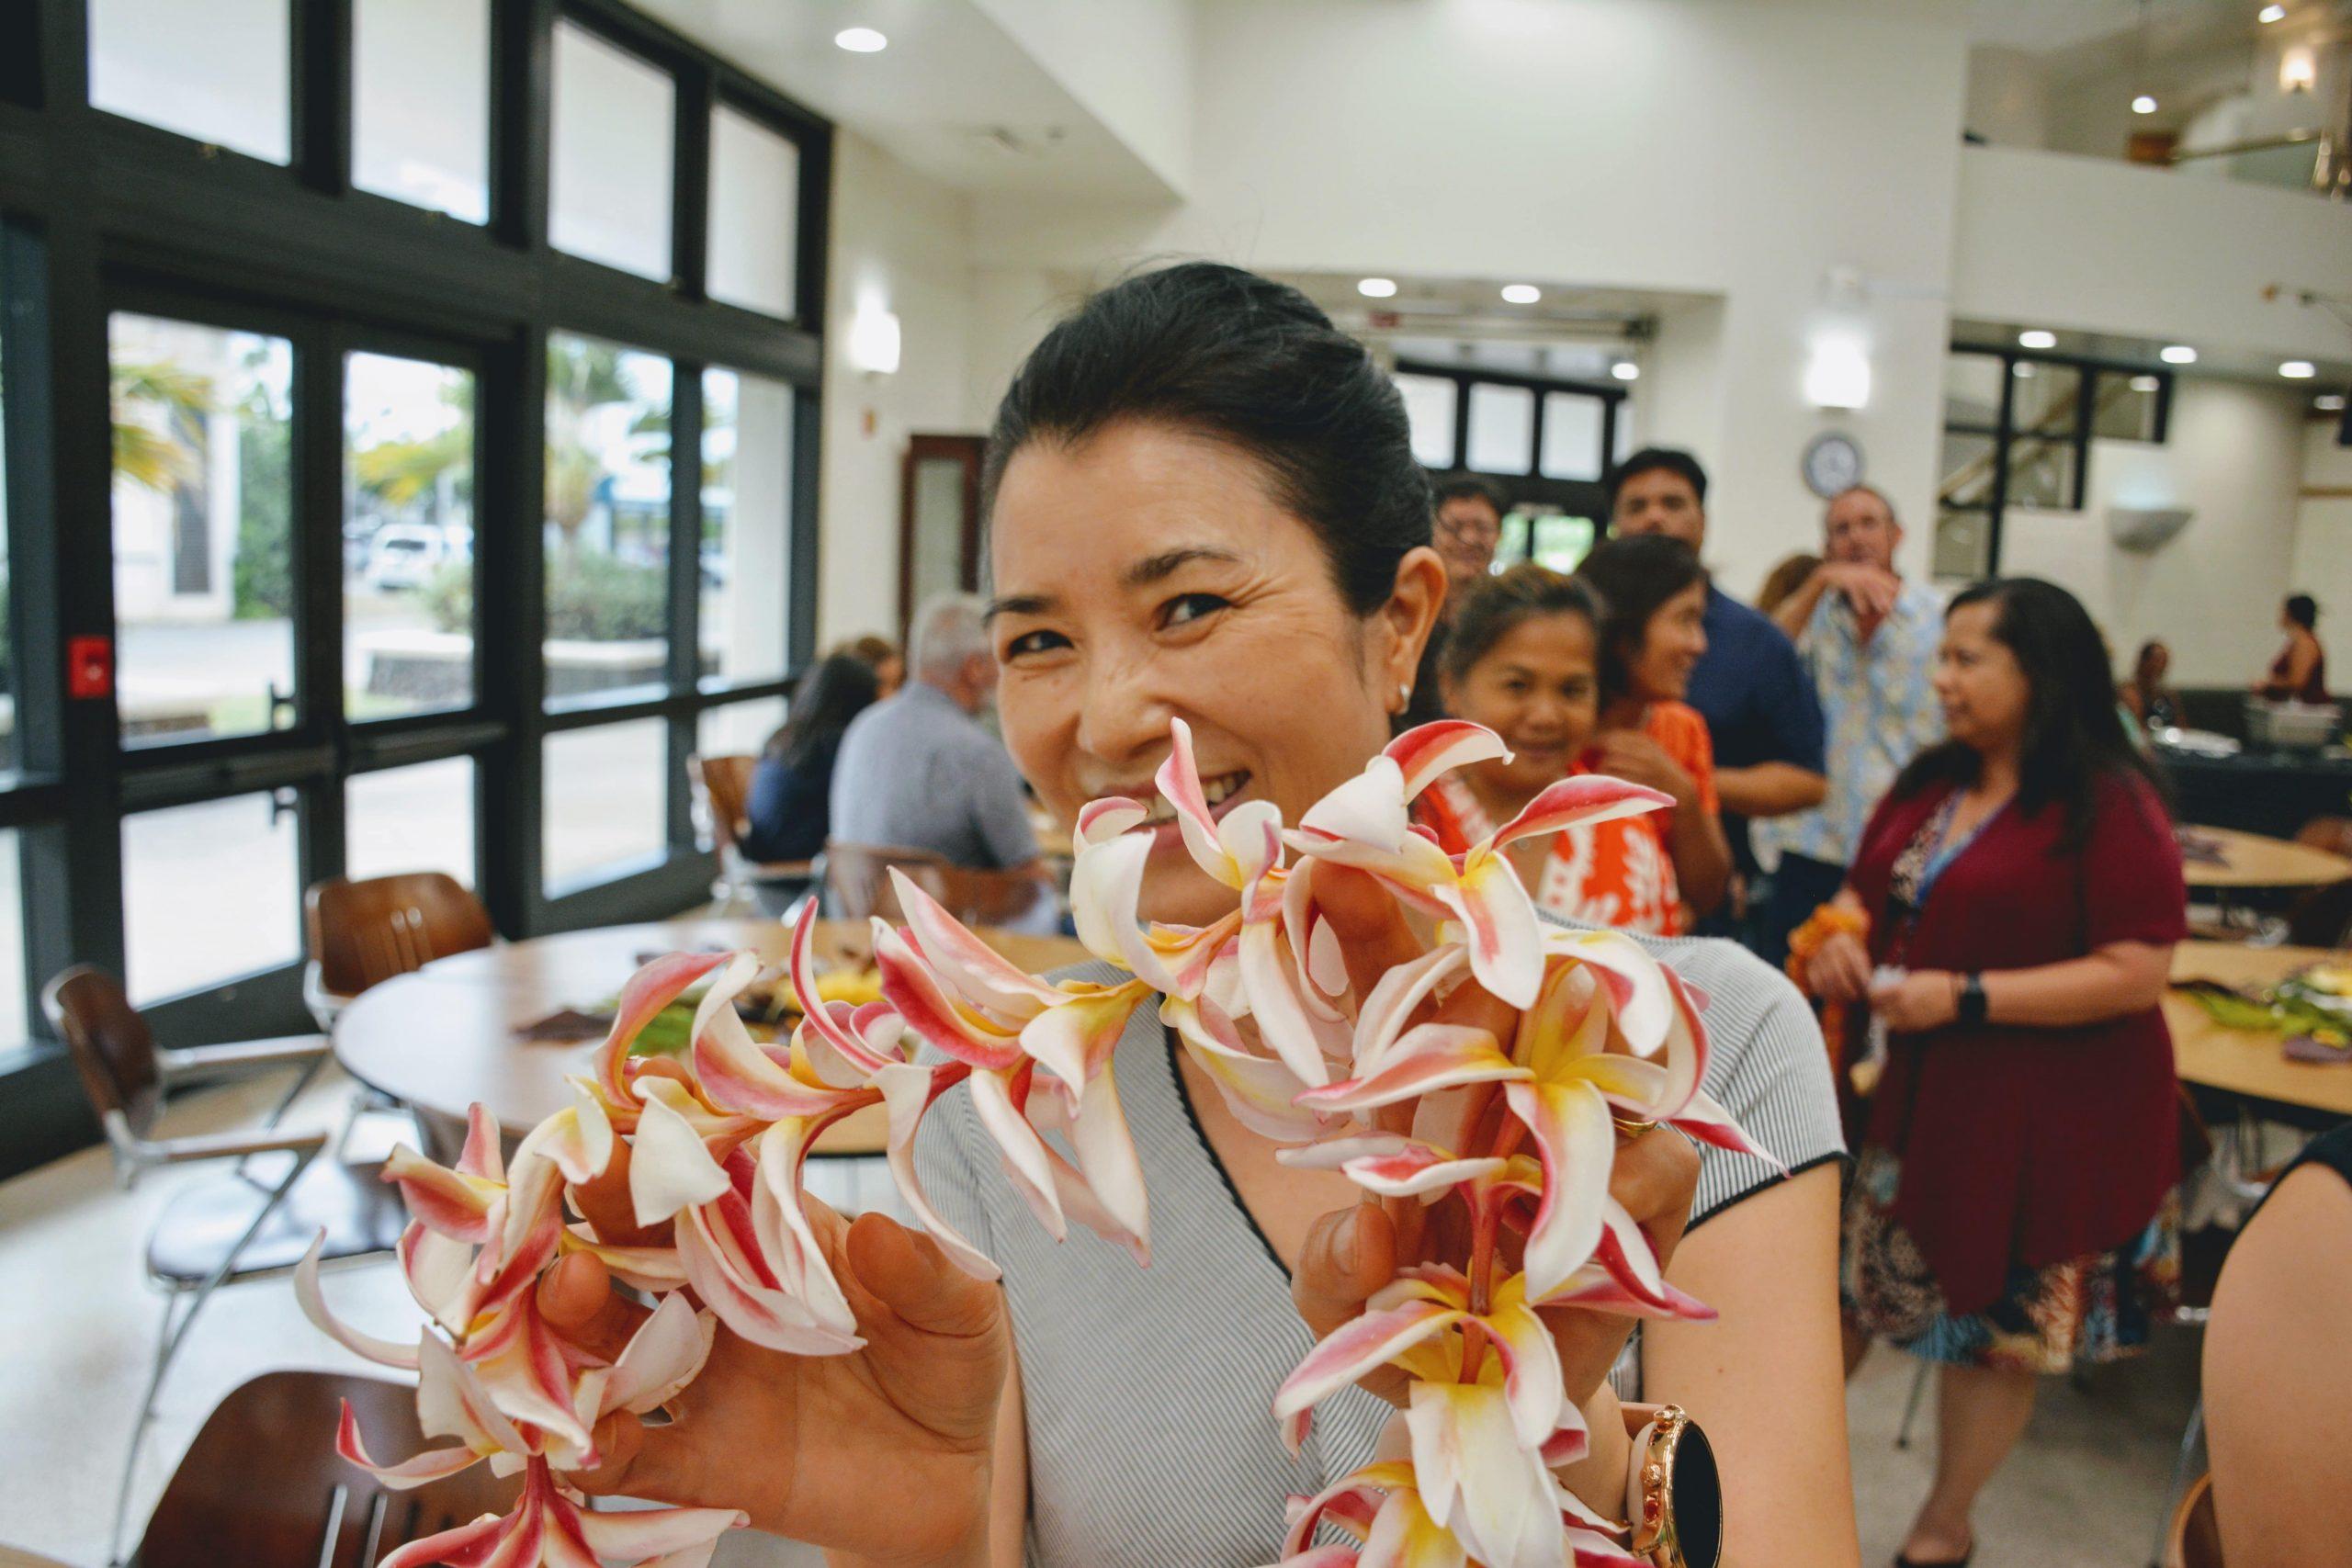 Student giving a lei